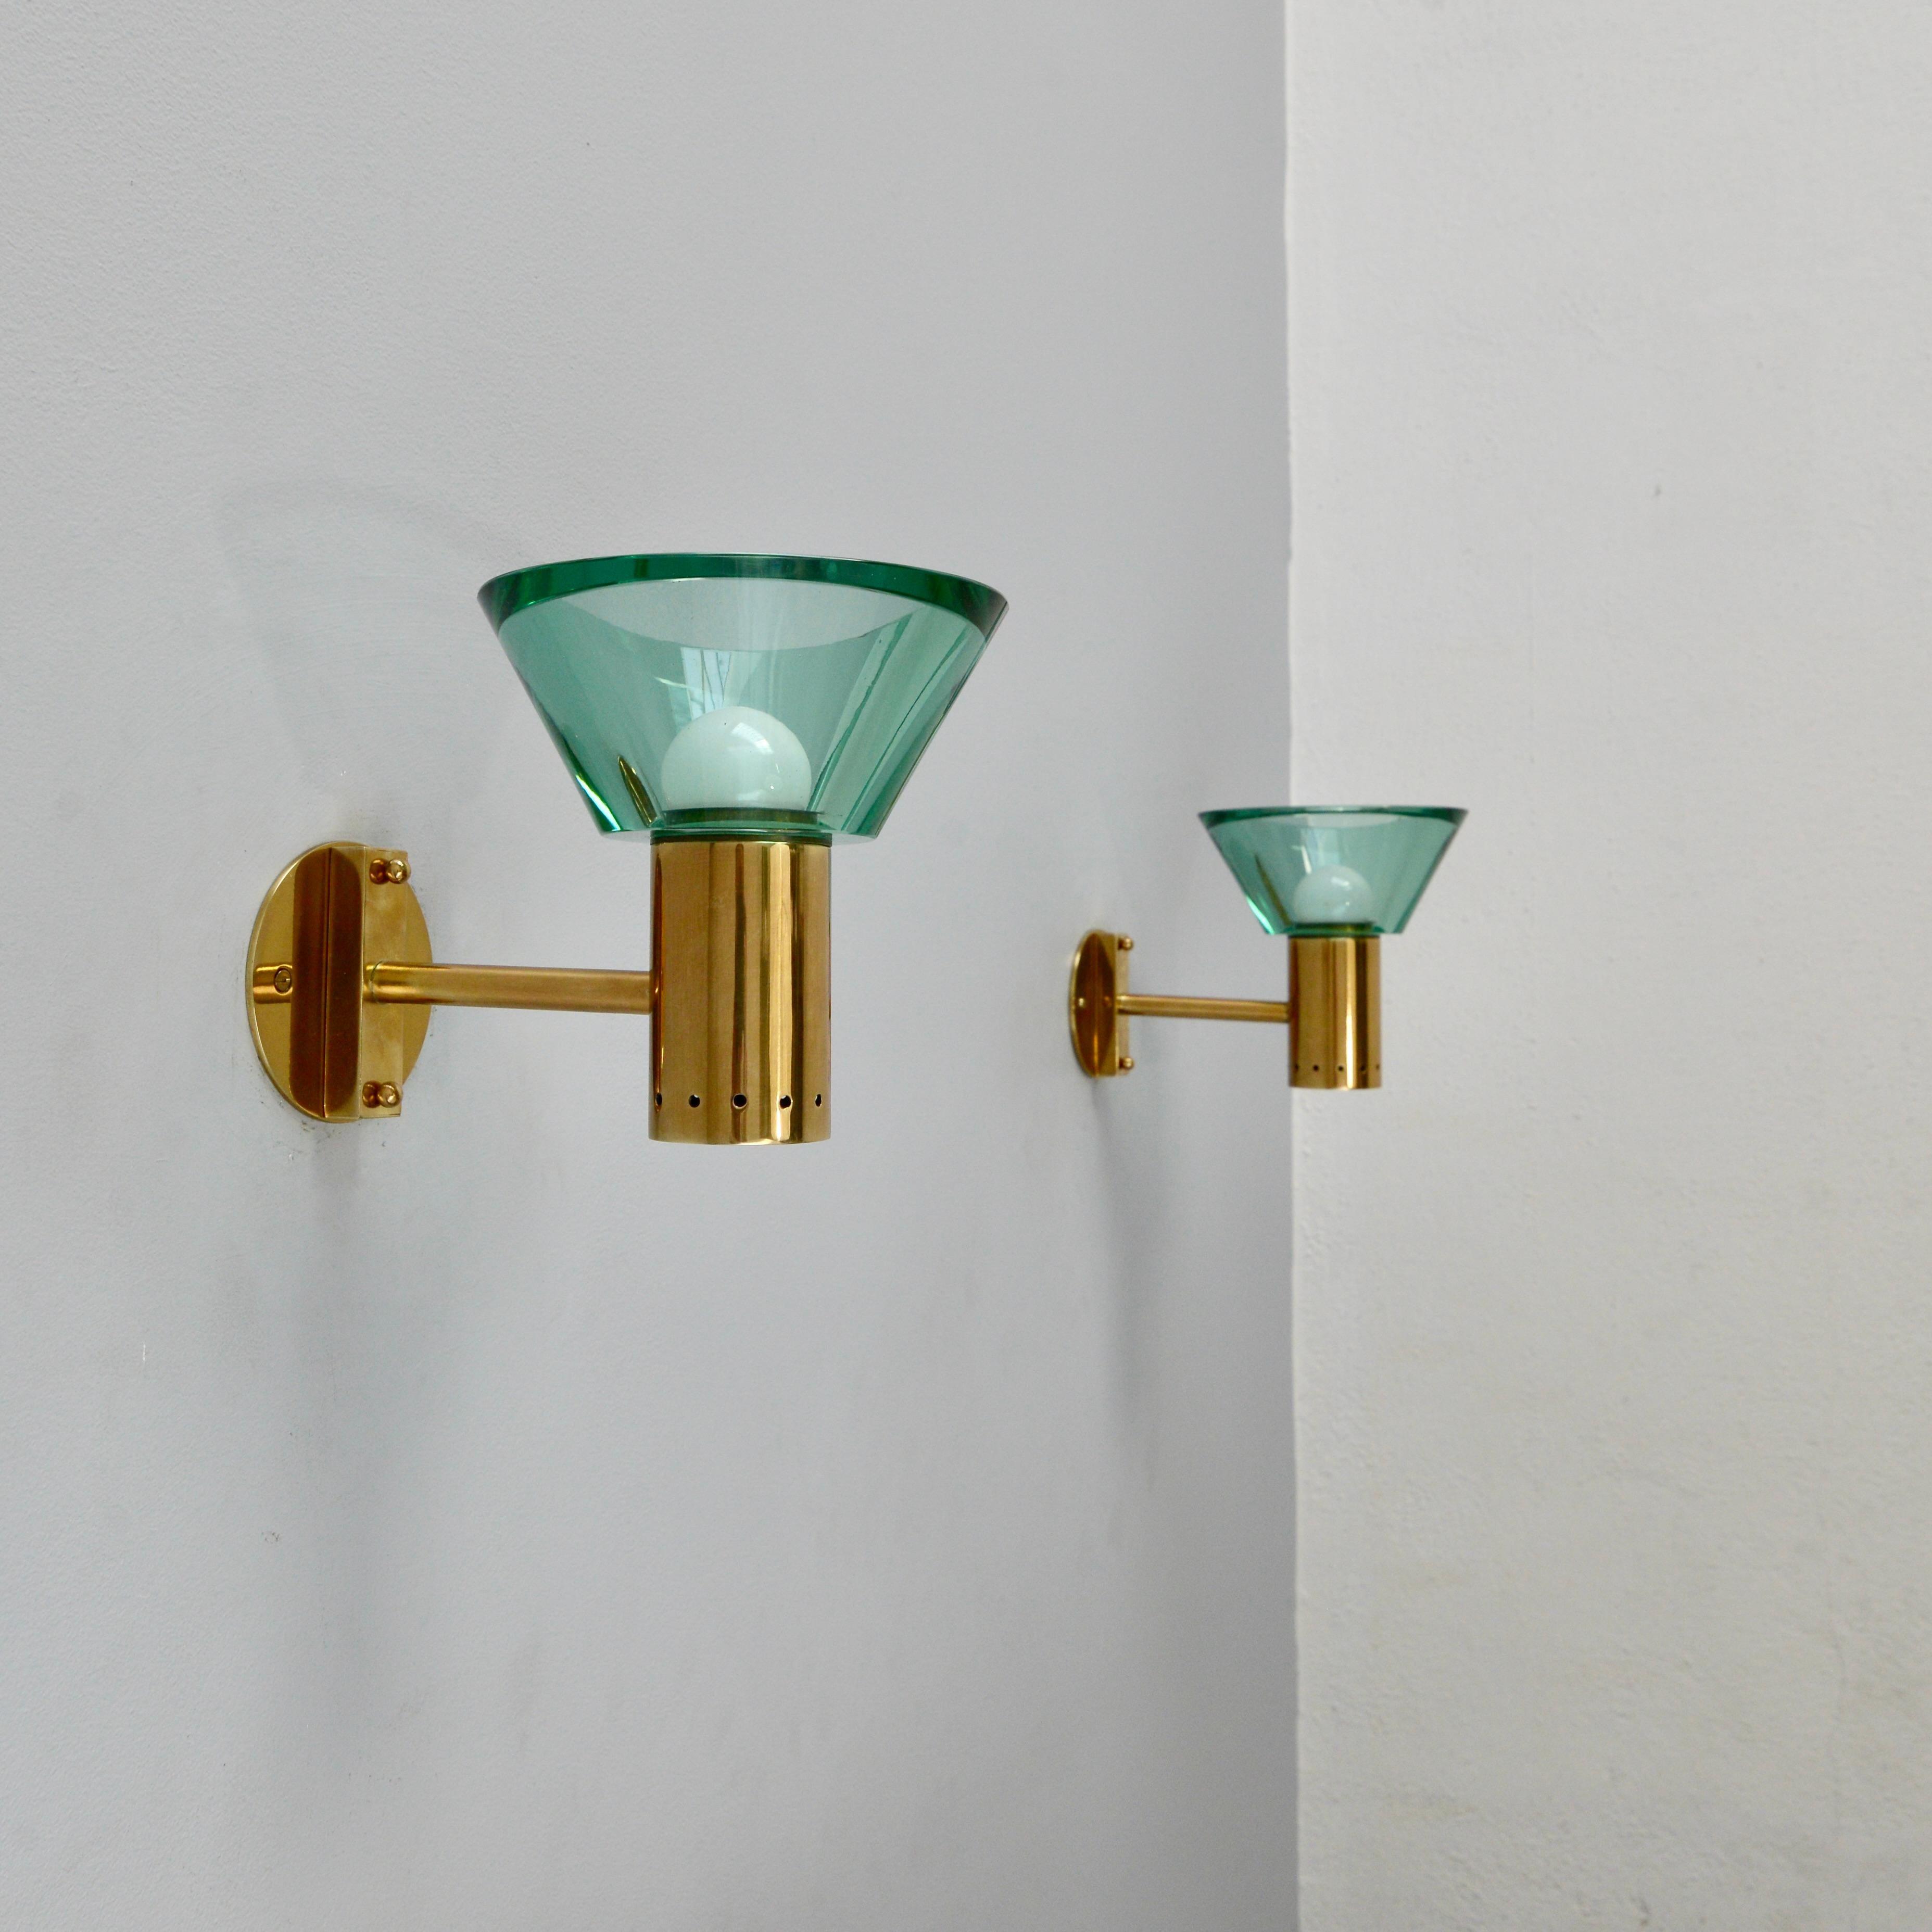 Pair of beautiful emerald glass and brass torchiere Seguso sconces from Italy. True tone of glass is represented with the light on. Fully restored. Brass and glass. Sold as a pair. 1-E26 light bulb supplied upon request per sconce.
Measurements: 7